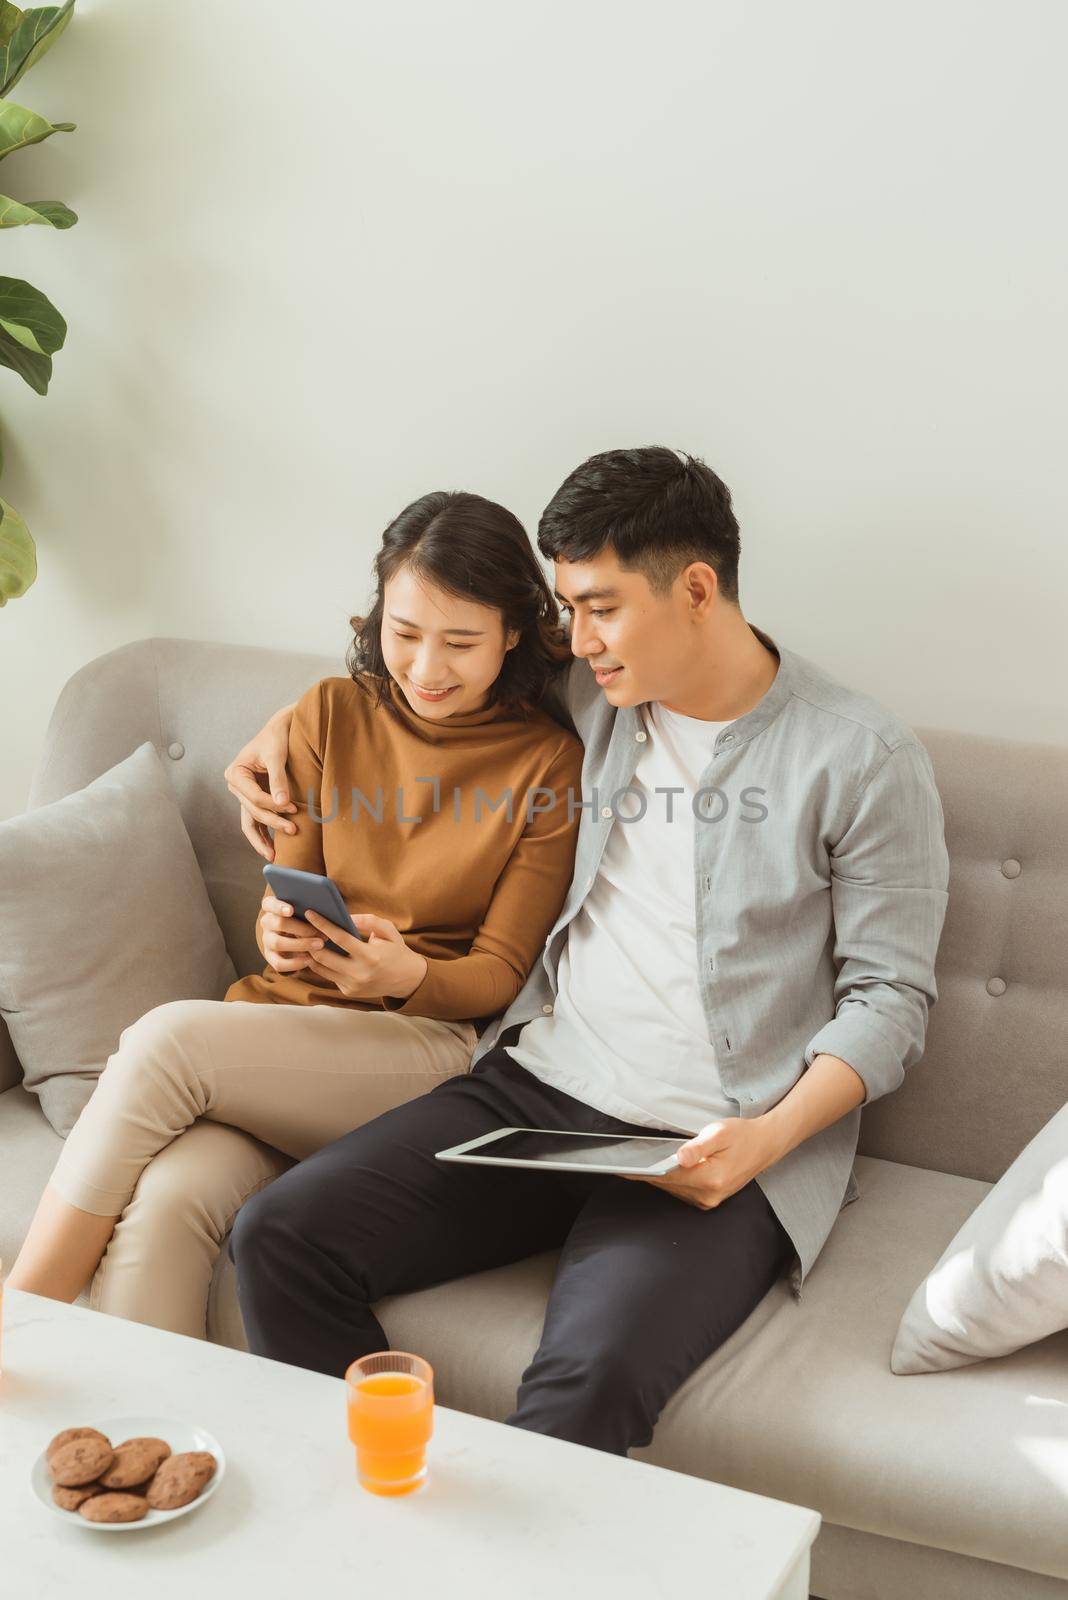 Young couple using a tablet and mobile phone on the couch while enjoying leisure time at home